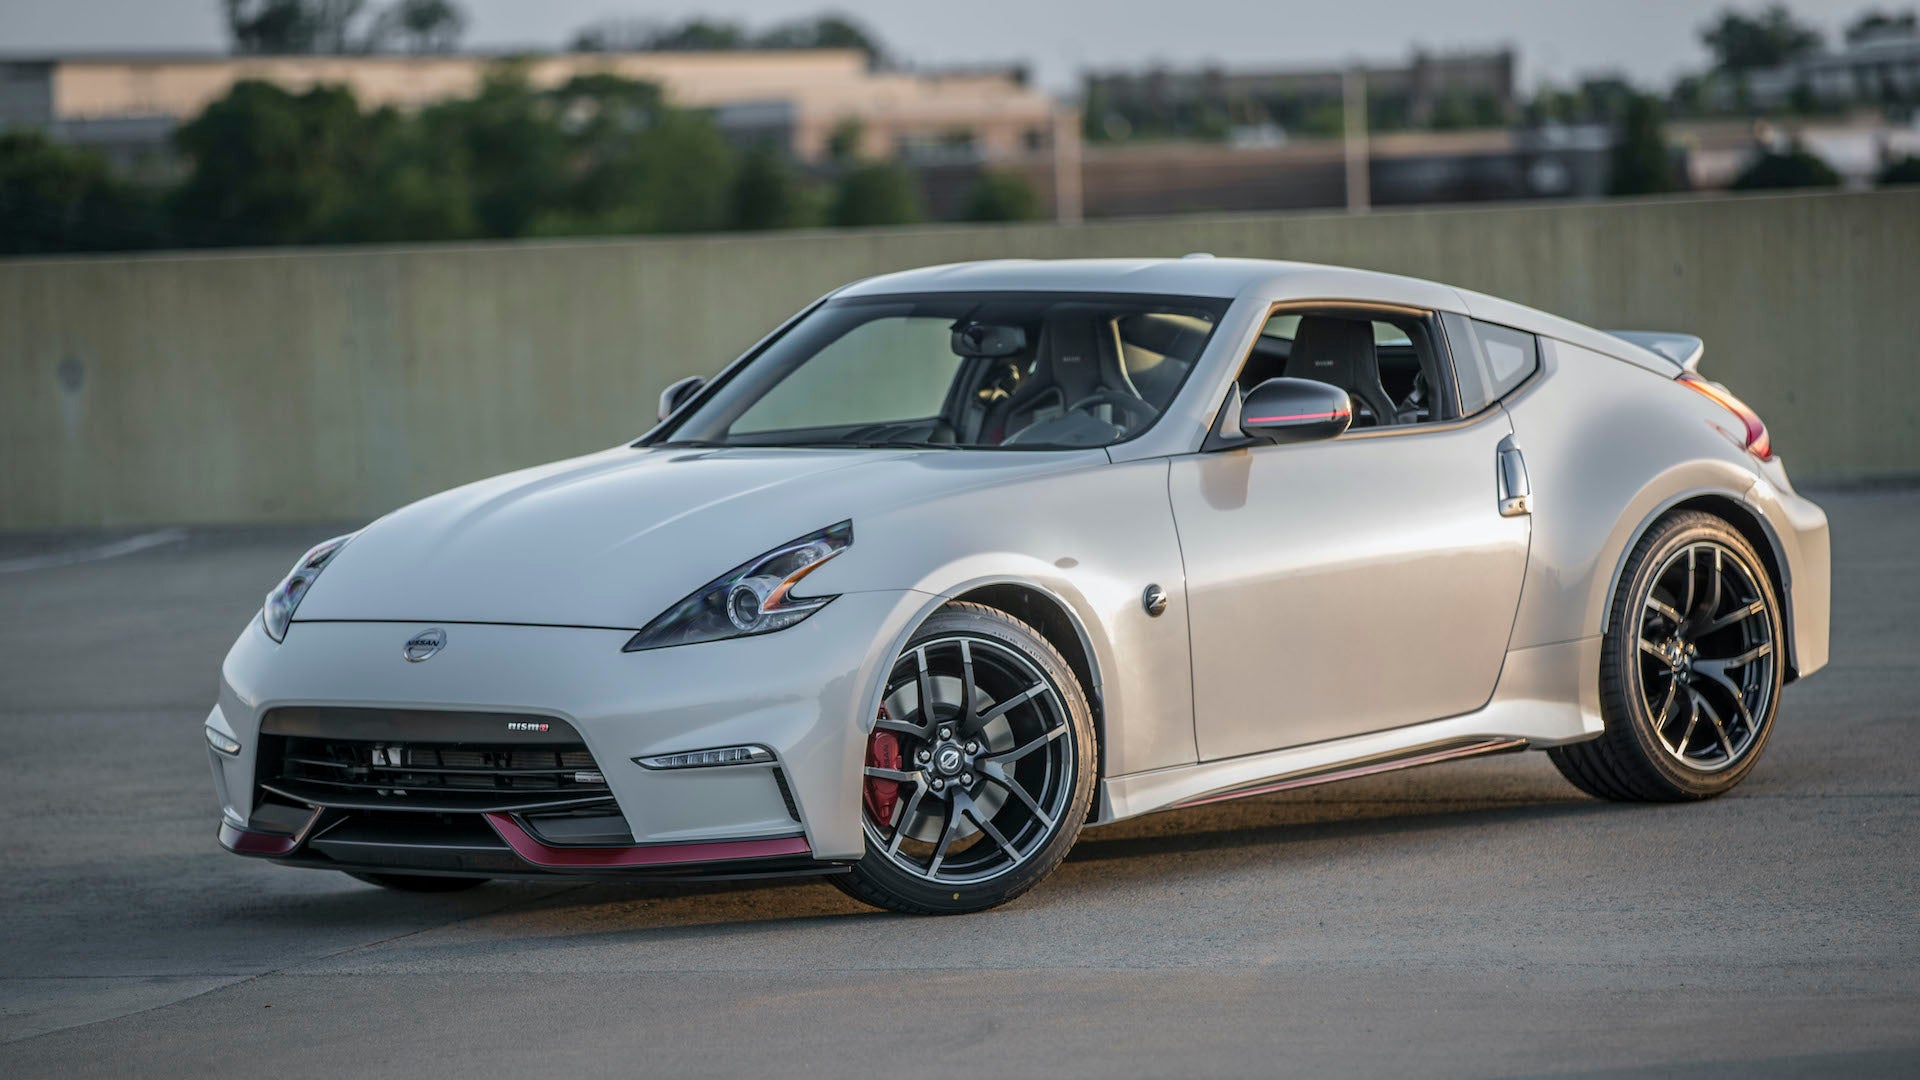 Congratulations to the Philippines, Which Can Finally Buy the Nissan 370Z as of This Month